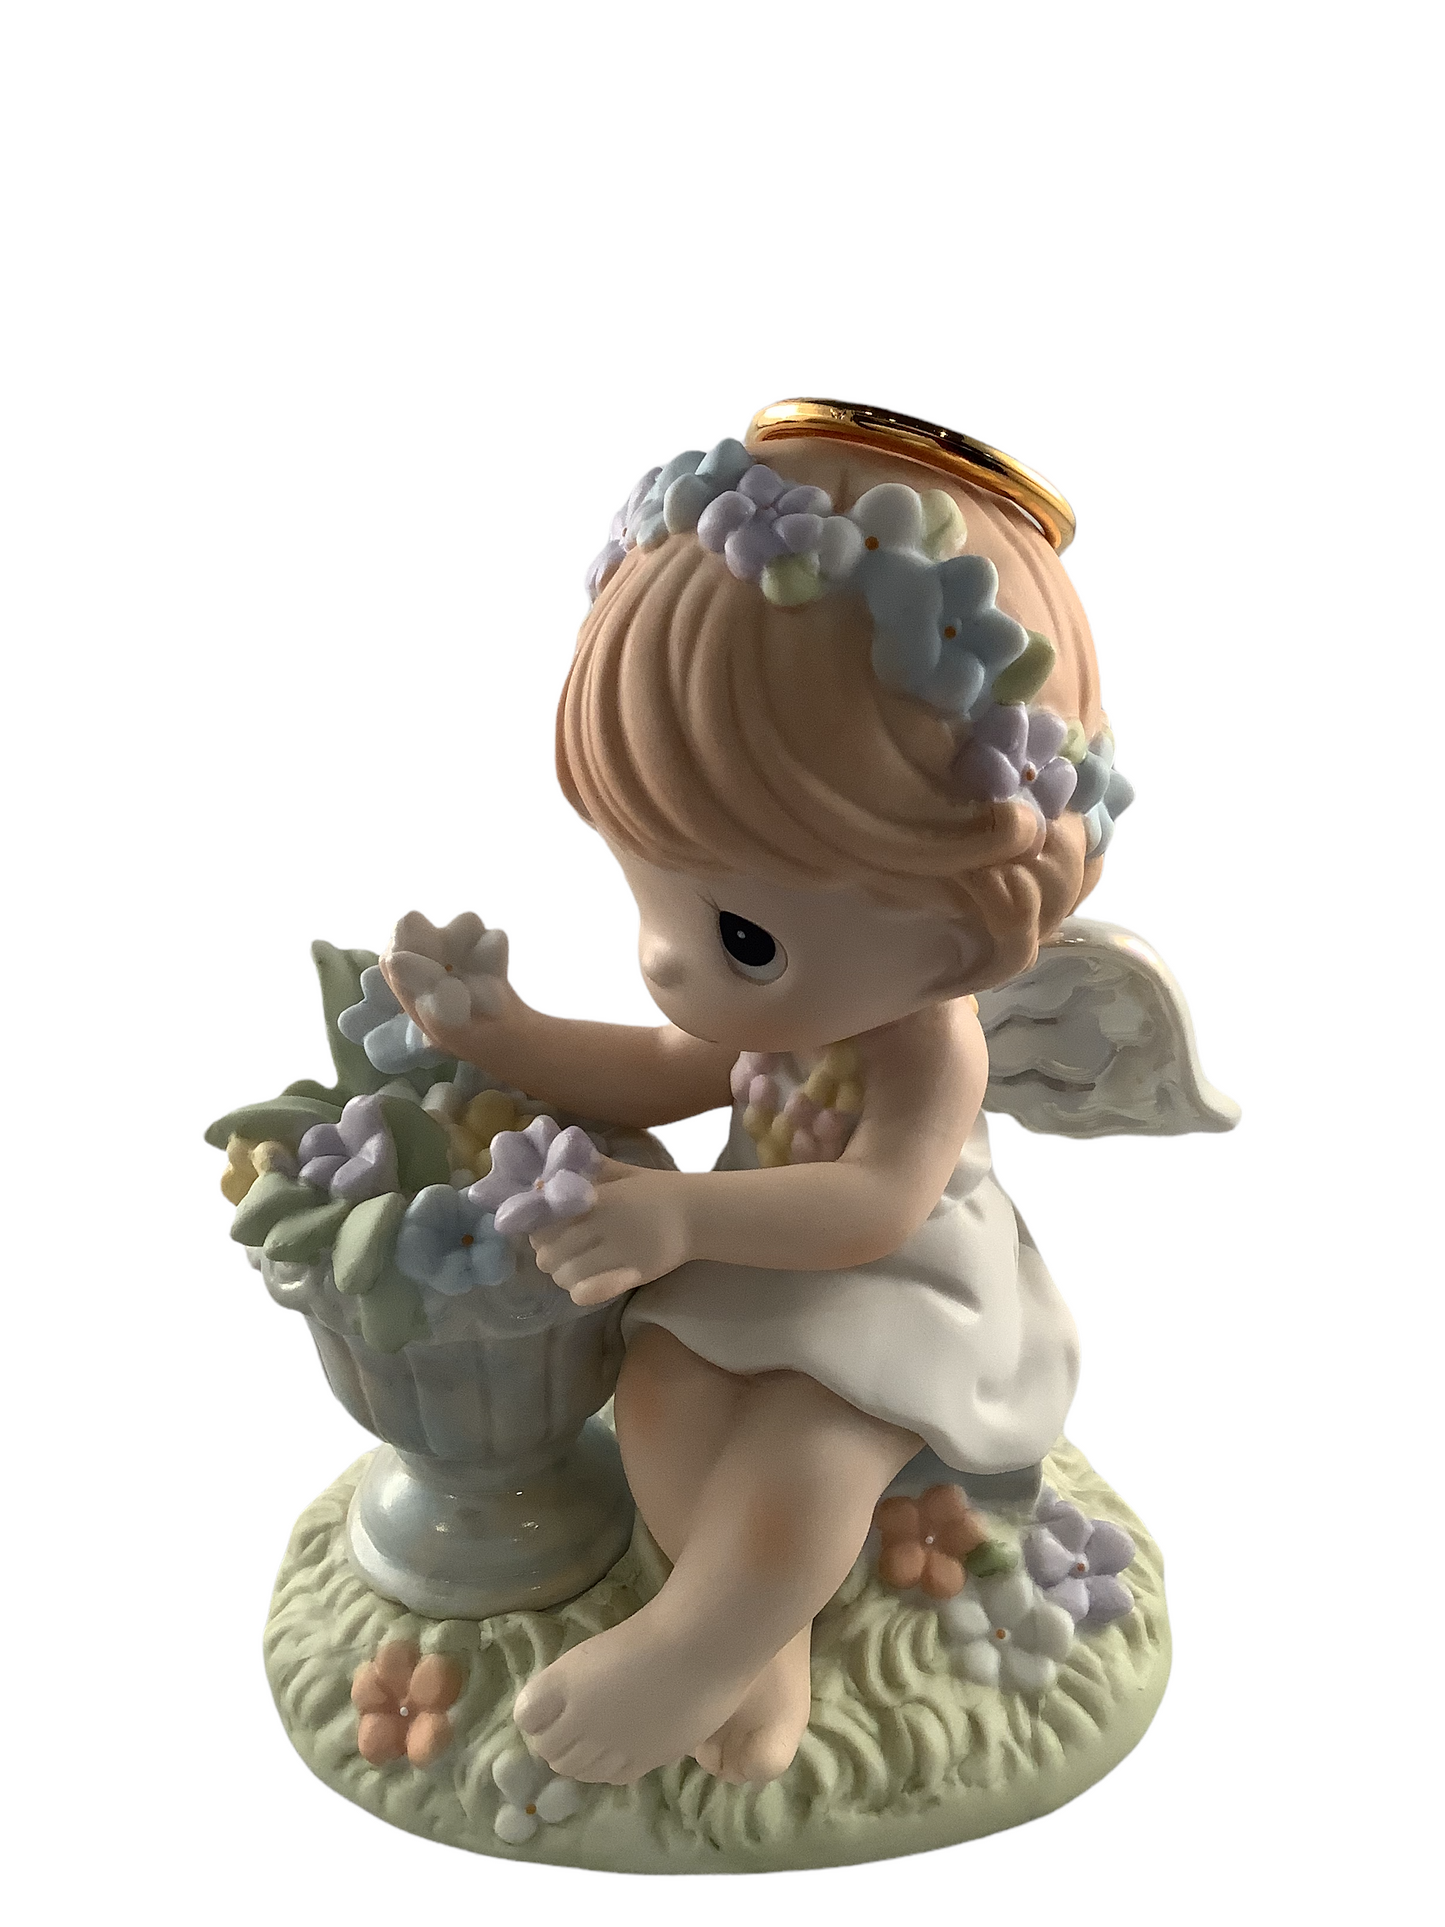 Dreams Bloom With A Seed Of Faith - Precious Moment Figurine